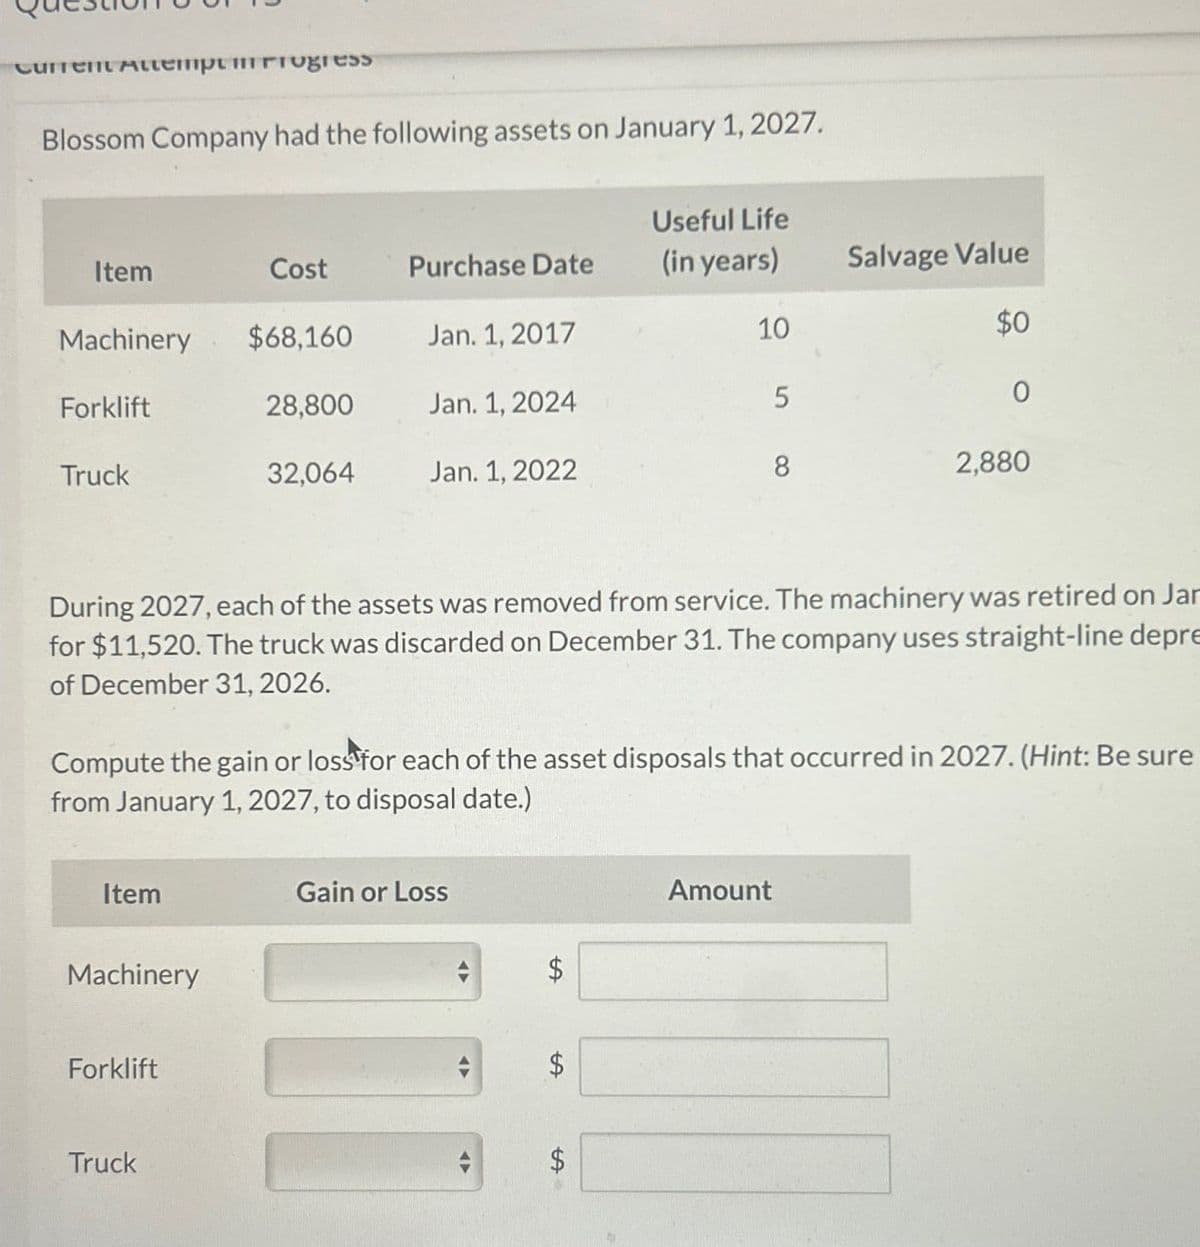 Current Attempt in Progress
Blossom Company had the following assets on January 1, 2027.
Item
Cost
Purchase Date
Useful Life
(in years)
Salvage Value
Machinery
$68,160
Jan. 1, 2017
10
$0
Forklift
28,800
Jan. 1, 2024
5
0
Truck
32,064
Jan. 1, 2022
8
2,880
During 2027, each of the assets was removed from service. The machinery was retired on Jar
for $11,520. The truck was discarded on December 31. The company uses straight-line depre
of December 31, 2026.
Compute the gain or loss for each of the asset disposals that occurred in 2027. (Hint: Be sure
from January 1, 2027, to disposal date.)
Item
Machinery
Forklift
Gain or Loss
$
SA
$
Truck
$
Amount